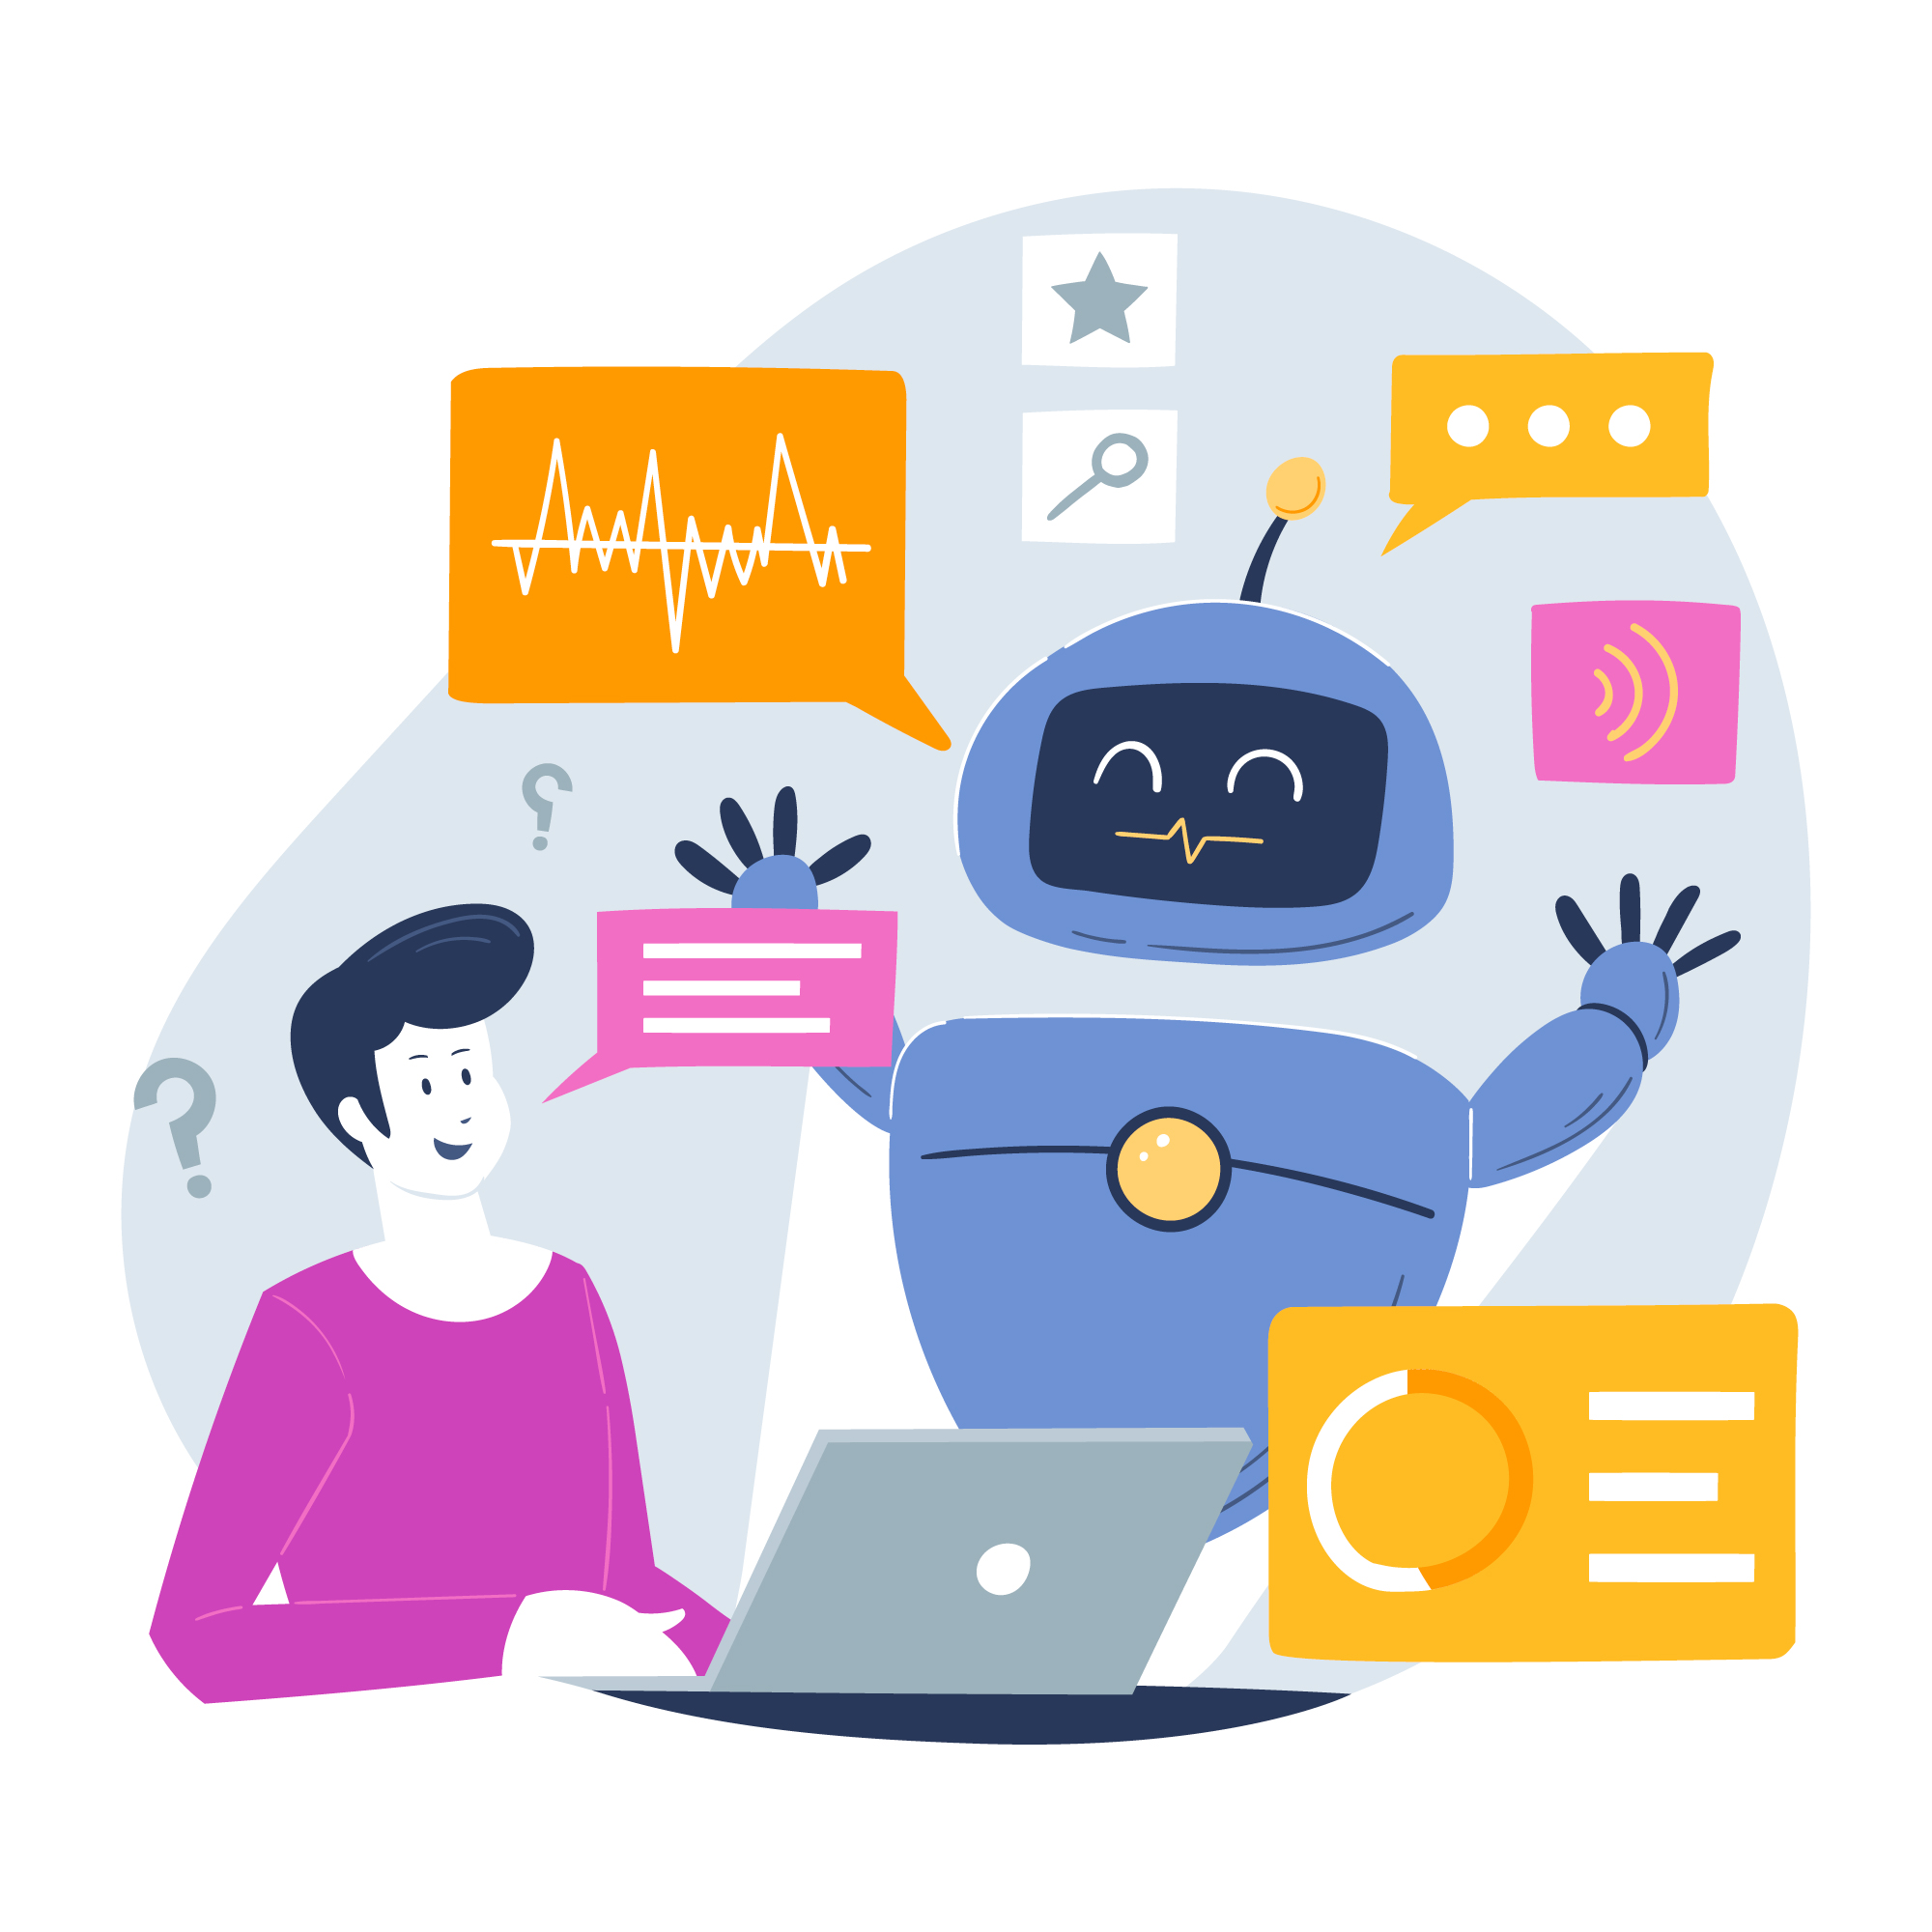 How Does Conversational AI Work